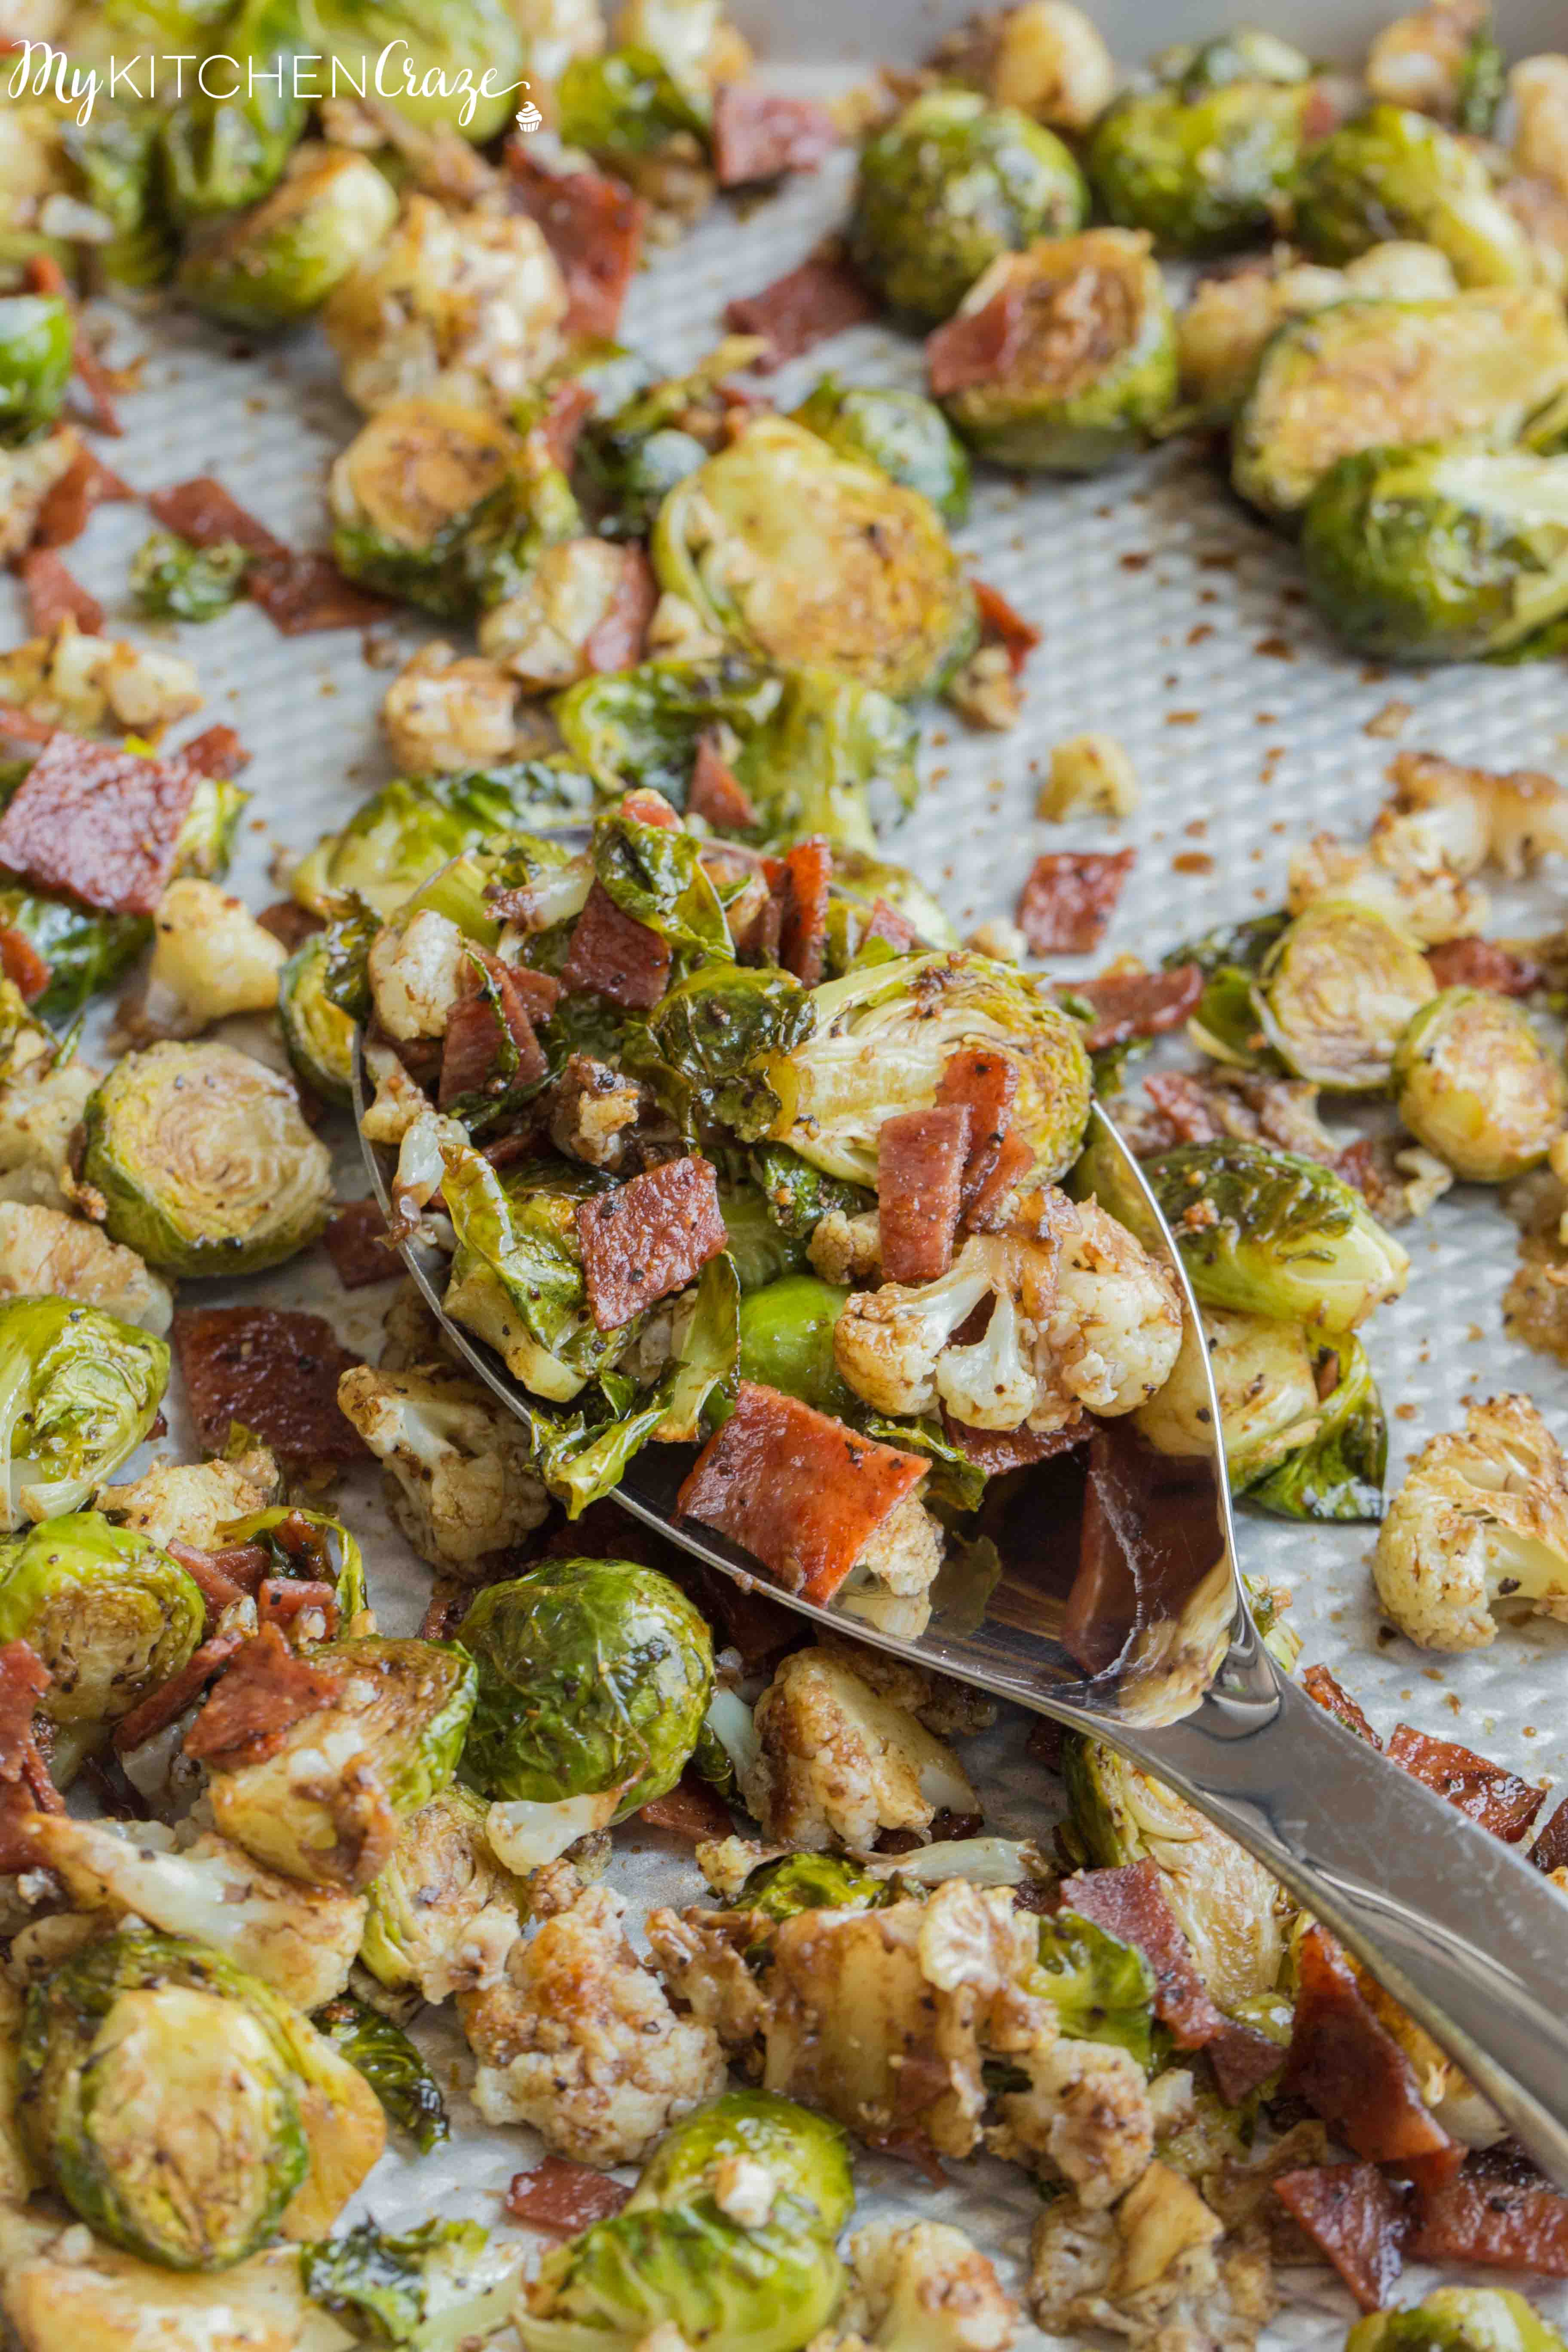 Roasted Brussel Sprouts with Bacon & Cauliflower ~ mykitchencraze.com ~ A delicious side dish loaded with roasted Brussel Sprouts and cauliflower, crispy bacon. Then topped with a delicious balsamic vinaigrette. It's the perfect side dish for any meat and the kids will love it!